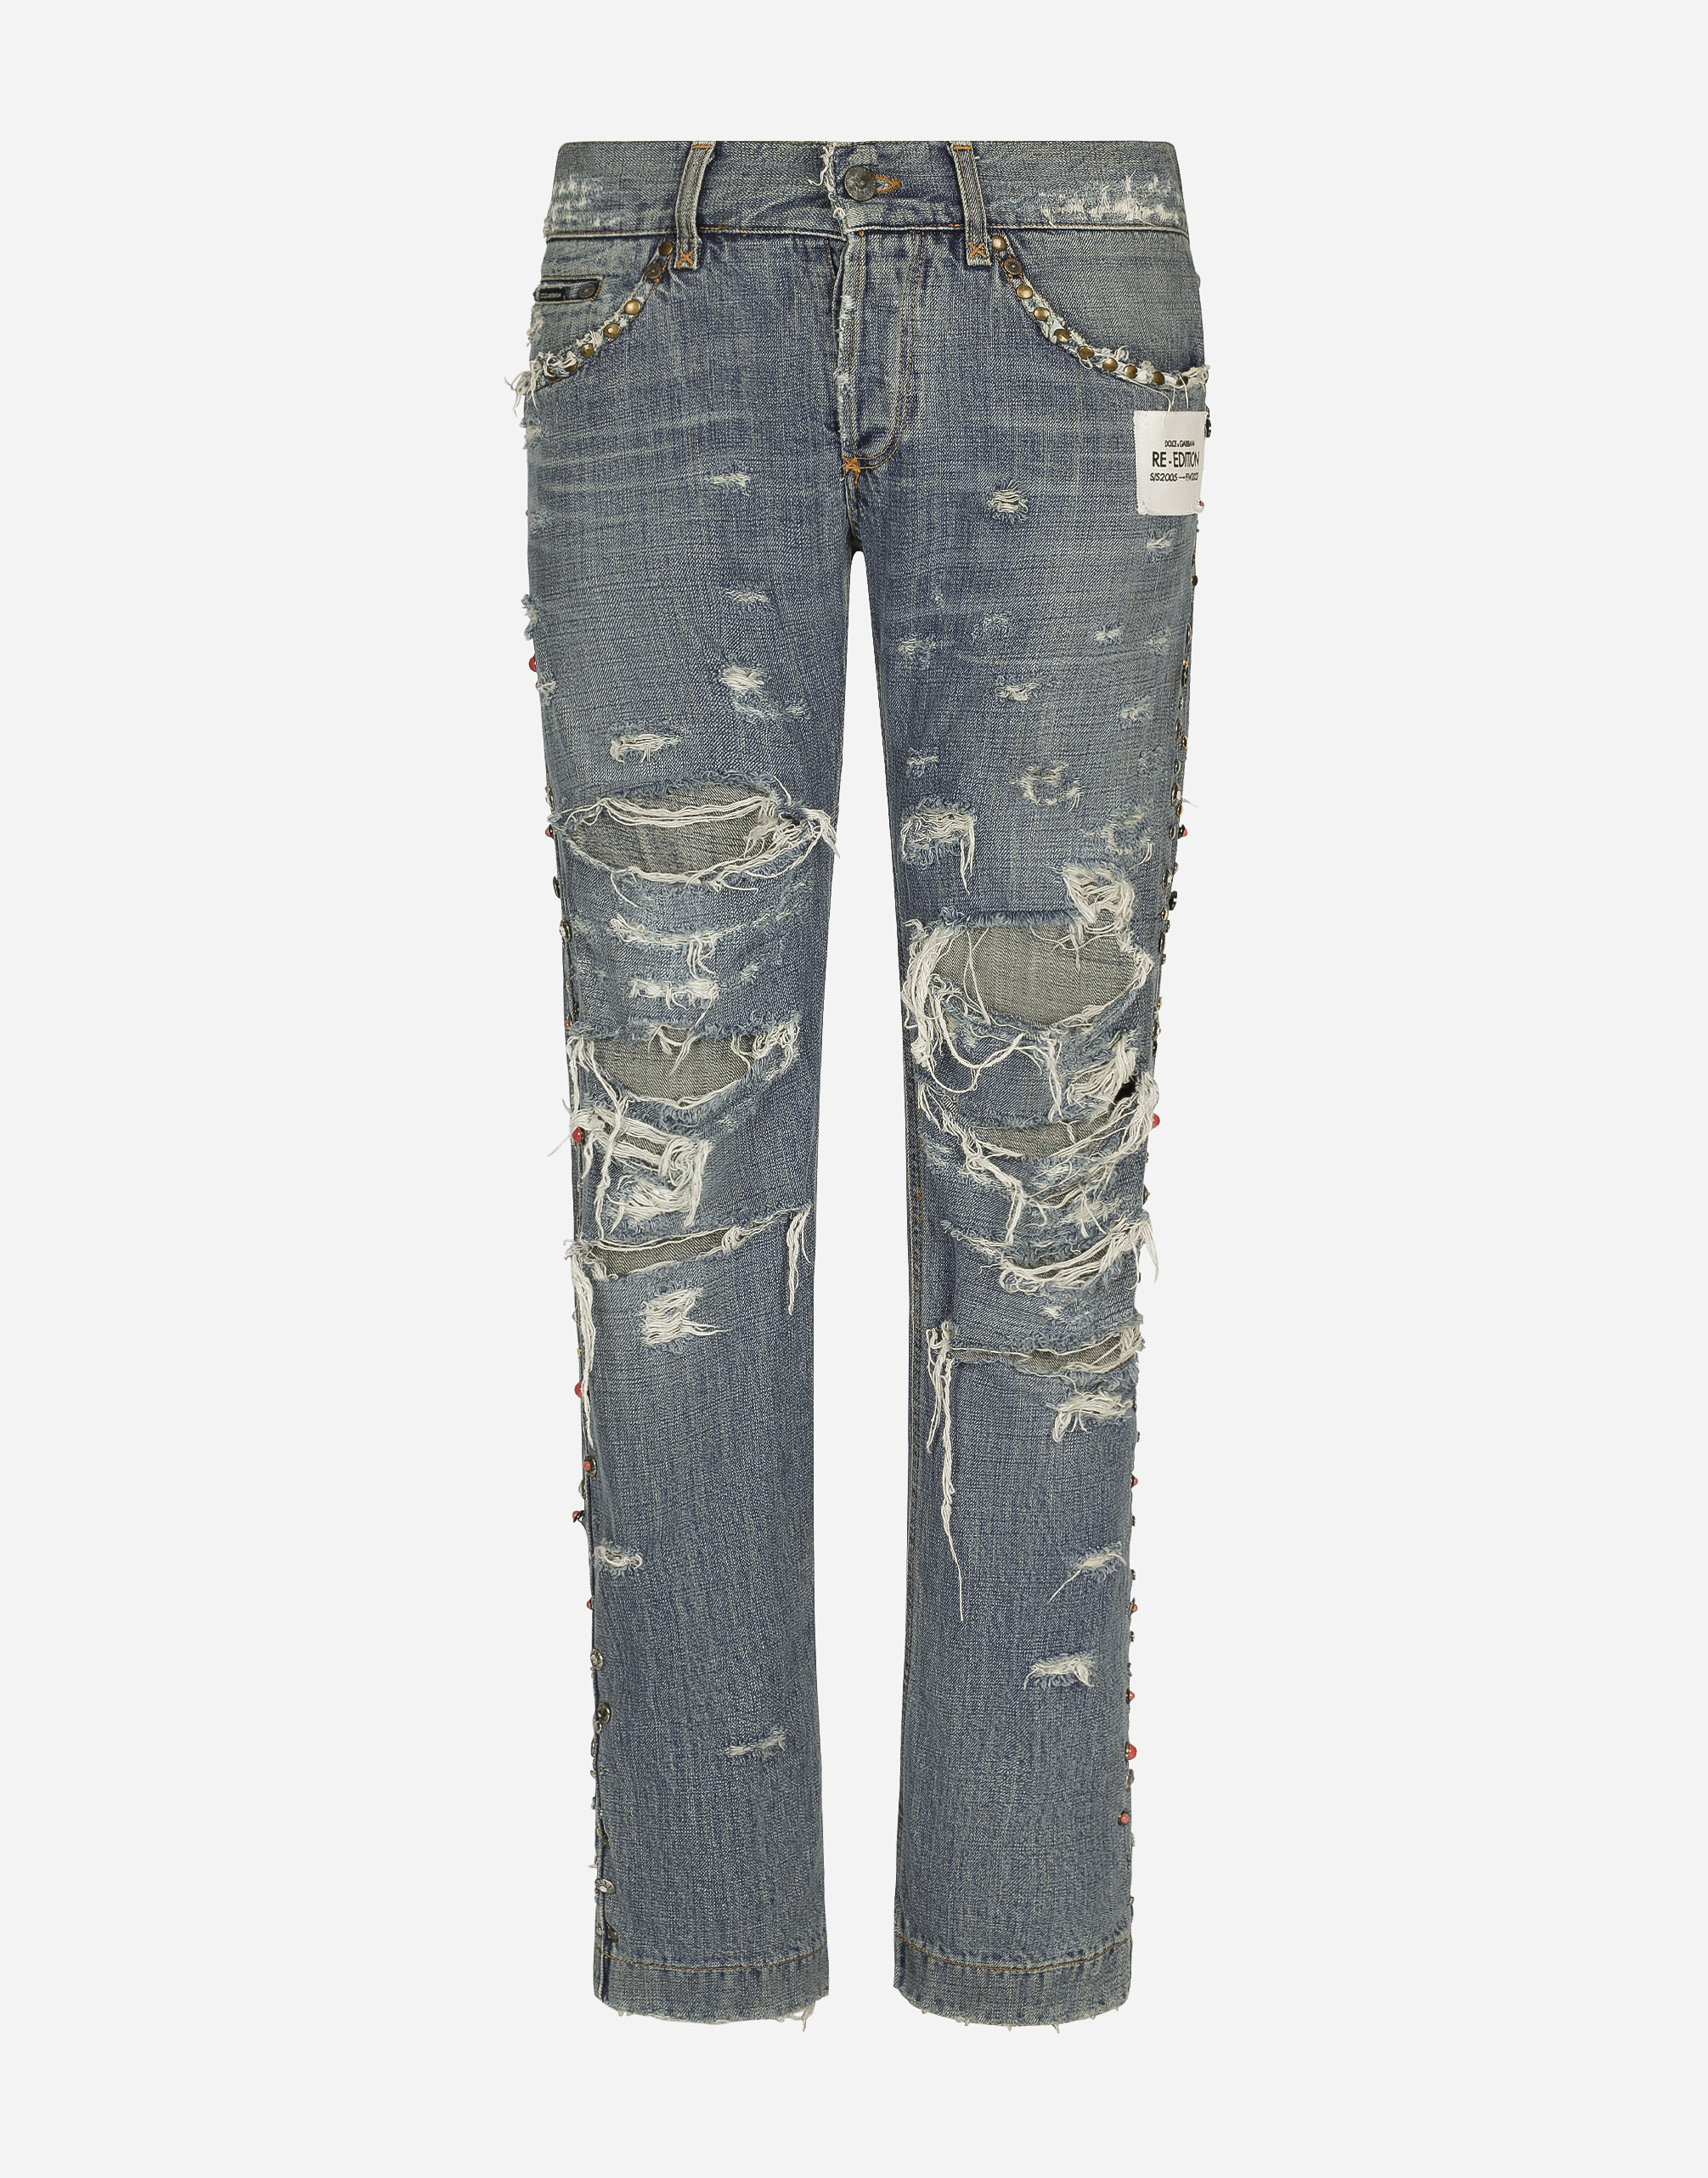 Washed denim jeans with studs and rips